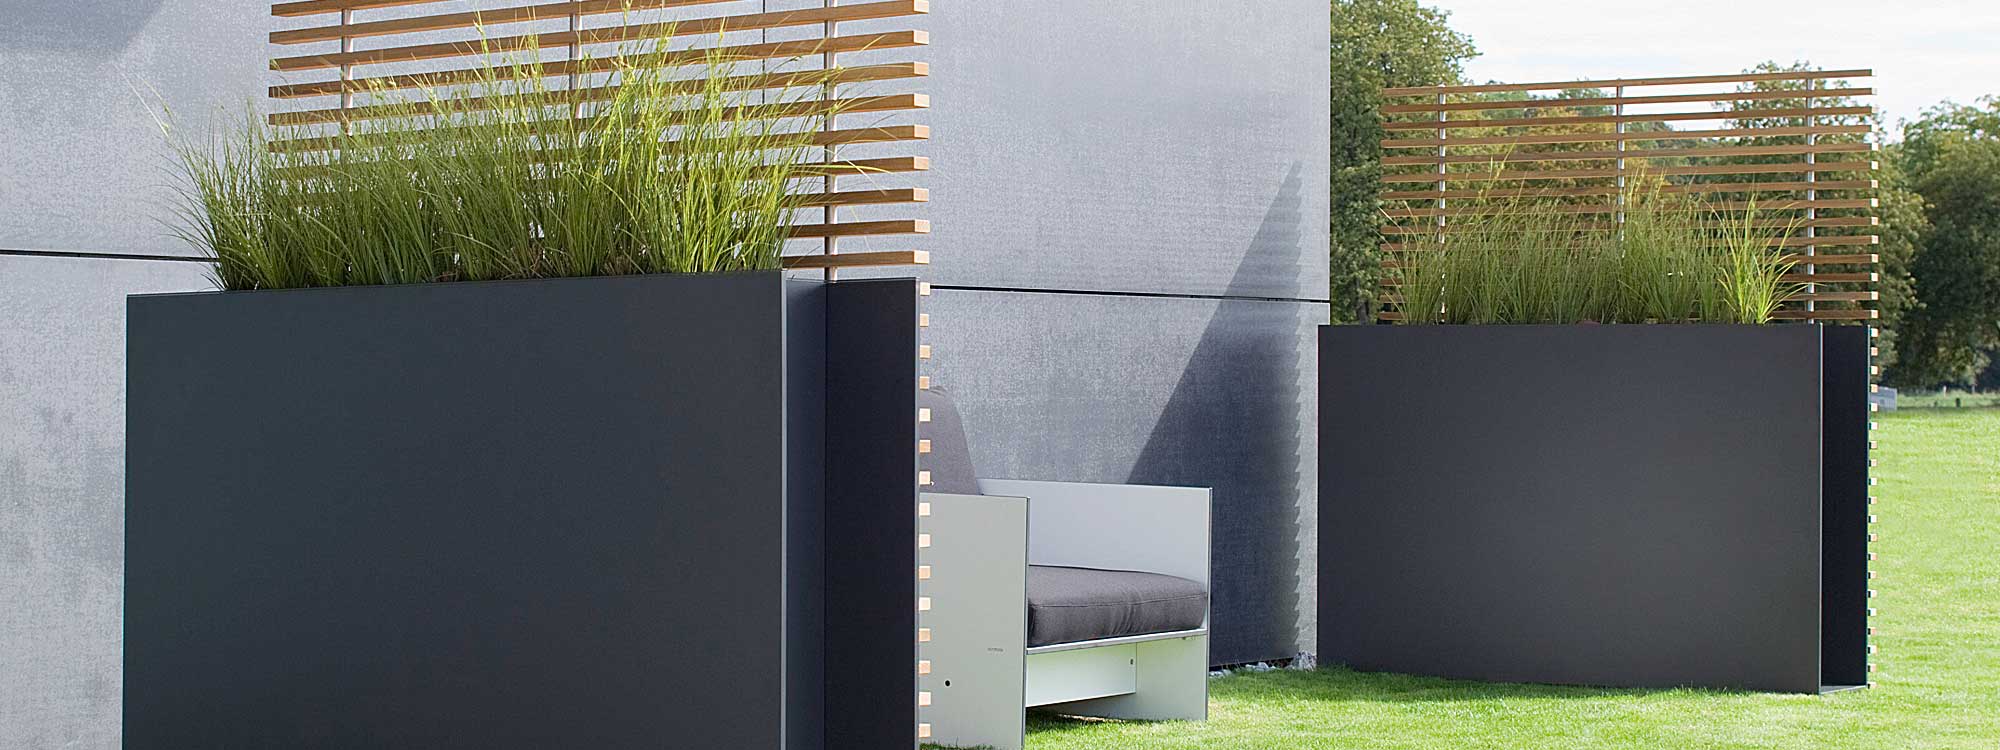 Image of pair of Sotomon anthracite raised planters with ash trellis on a lawn against a poured concrete wall, with a white Riva garden lounger in between the planters